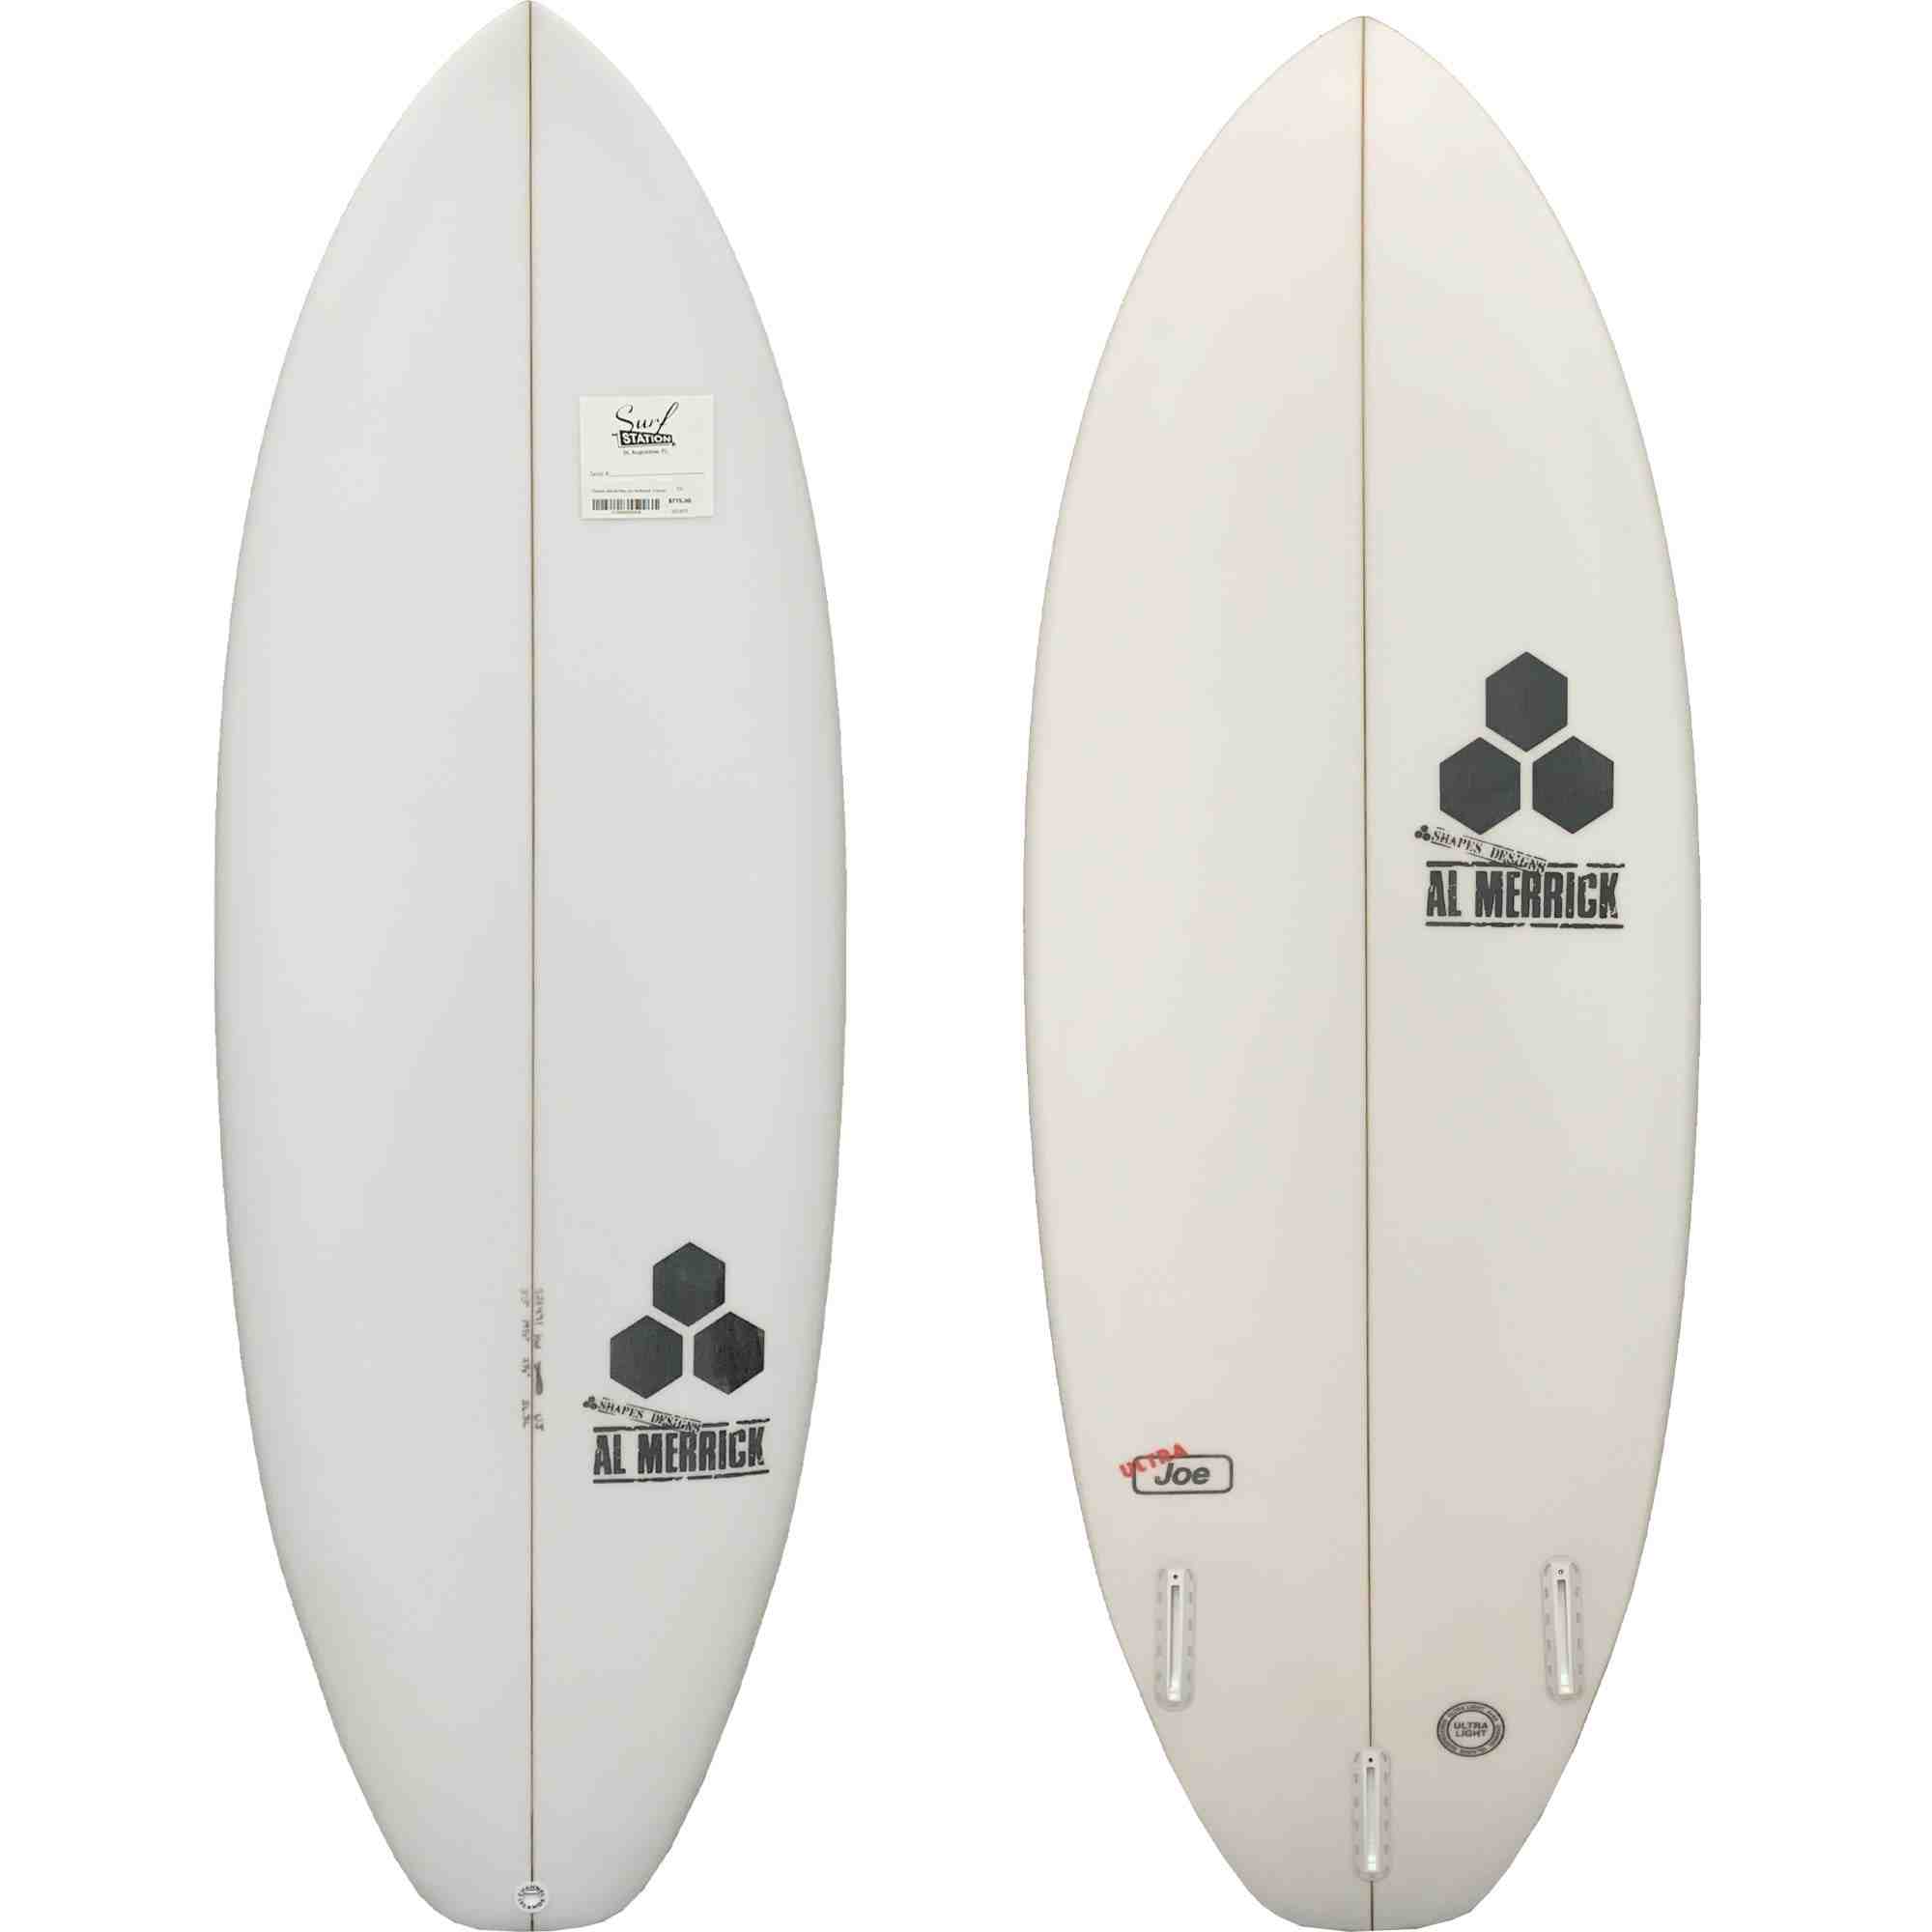 How long does it take to get a custom board from Channel Islands?